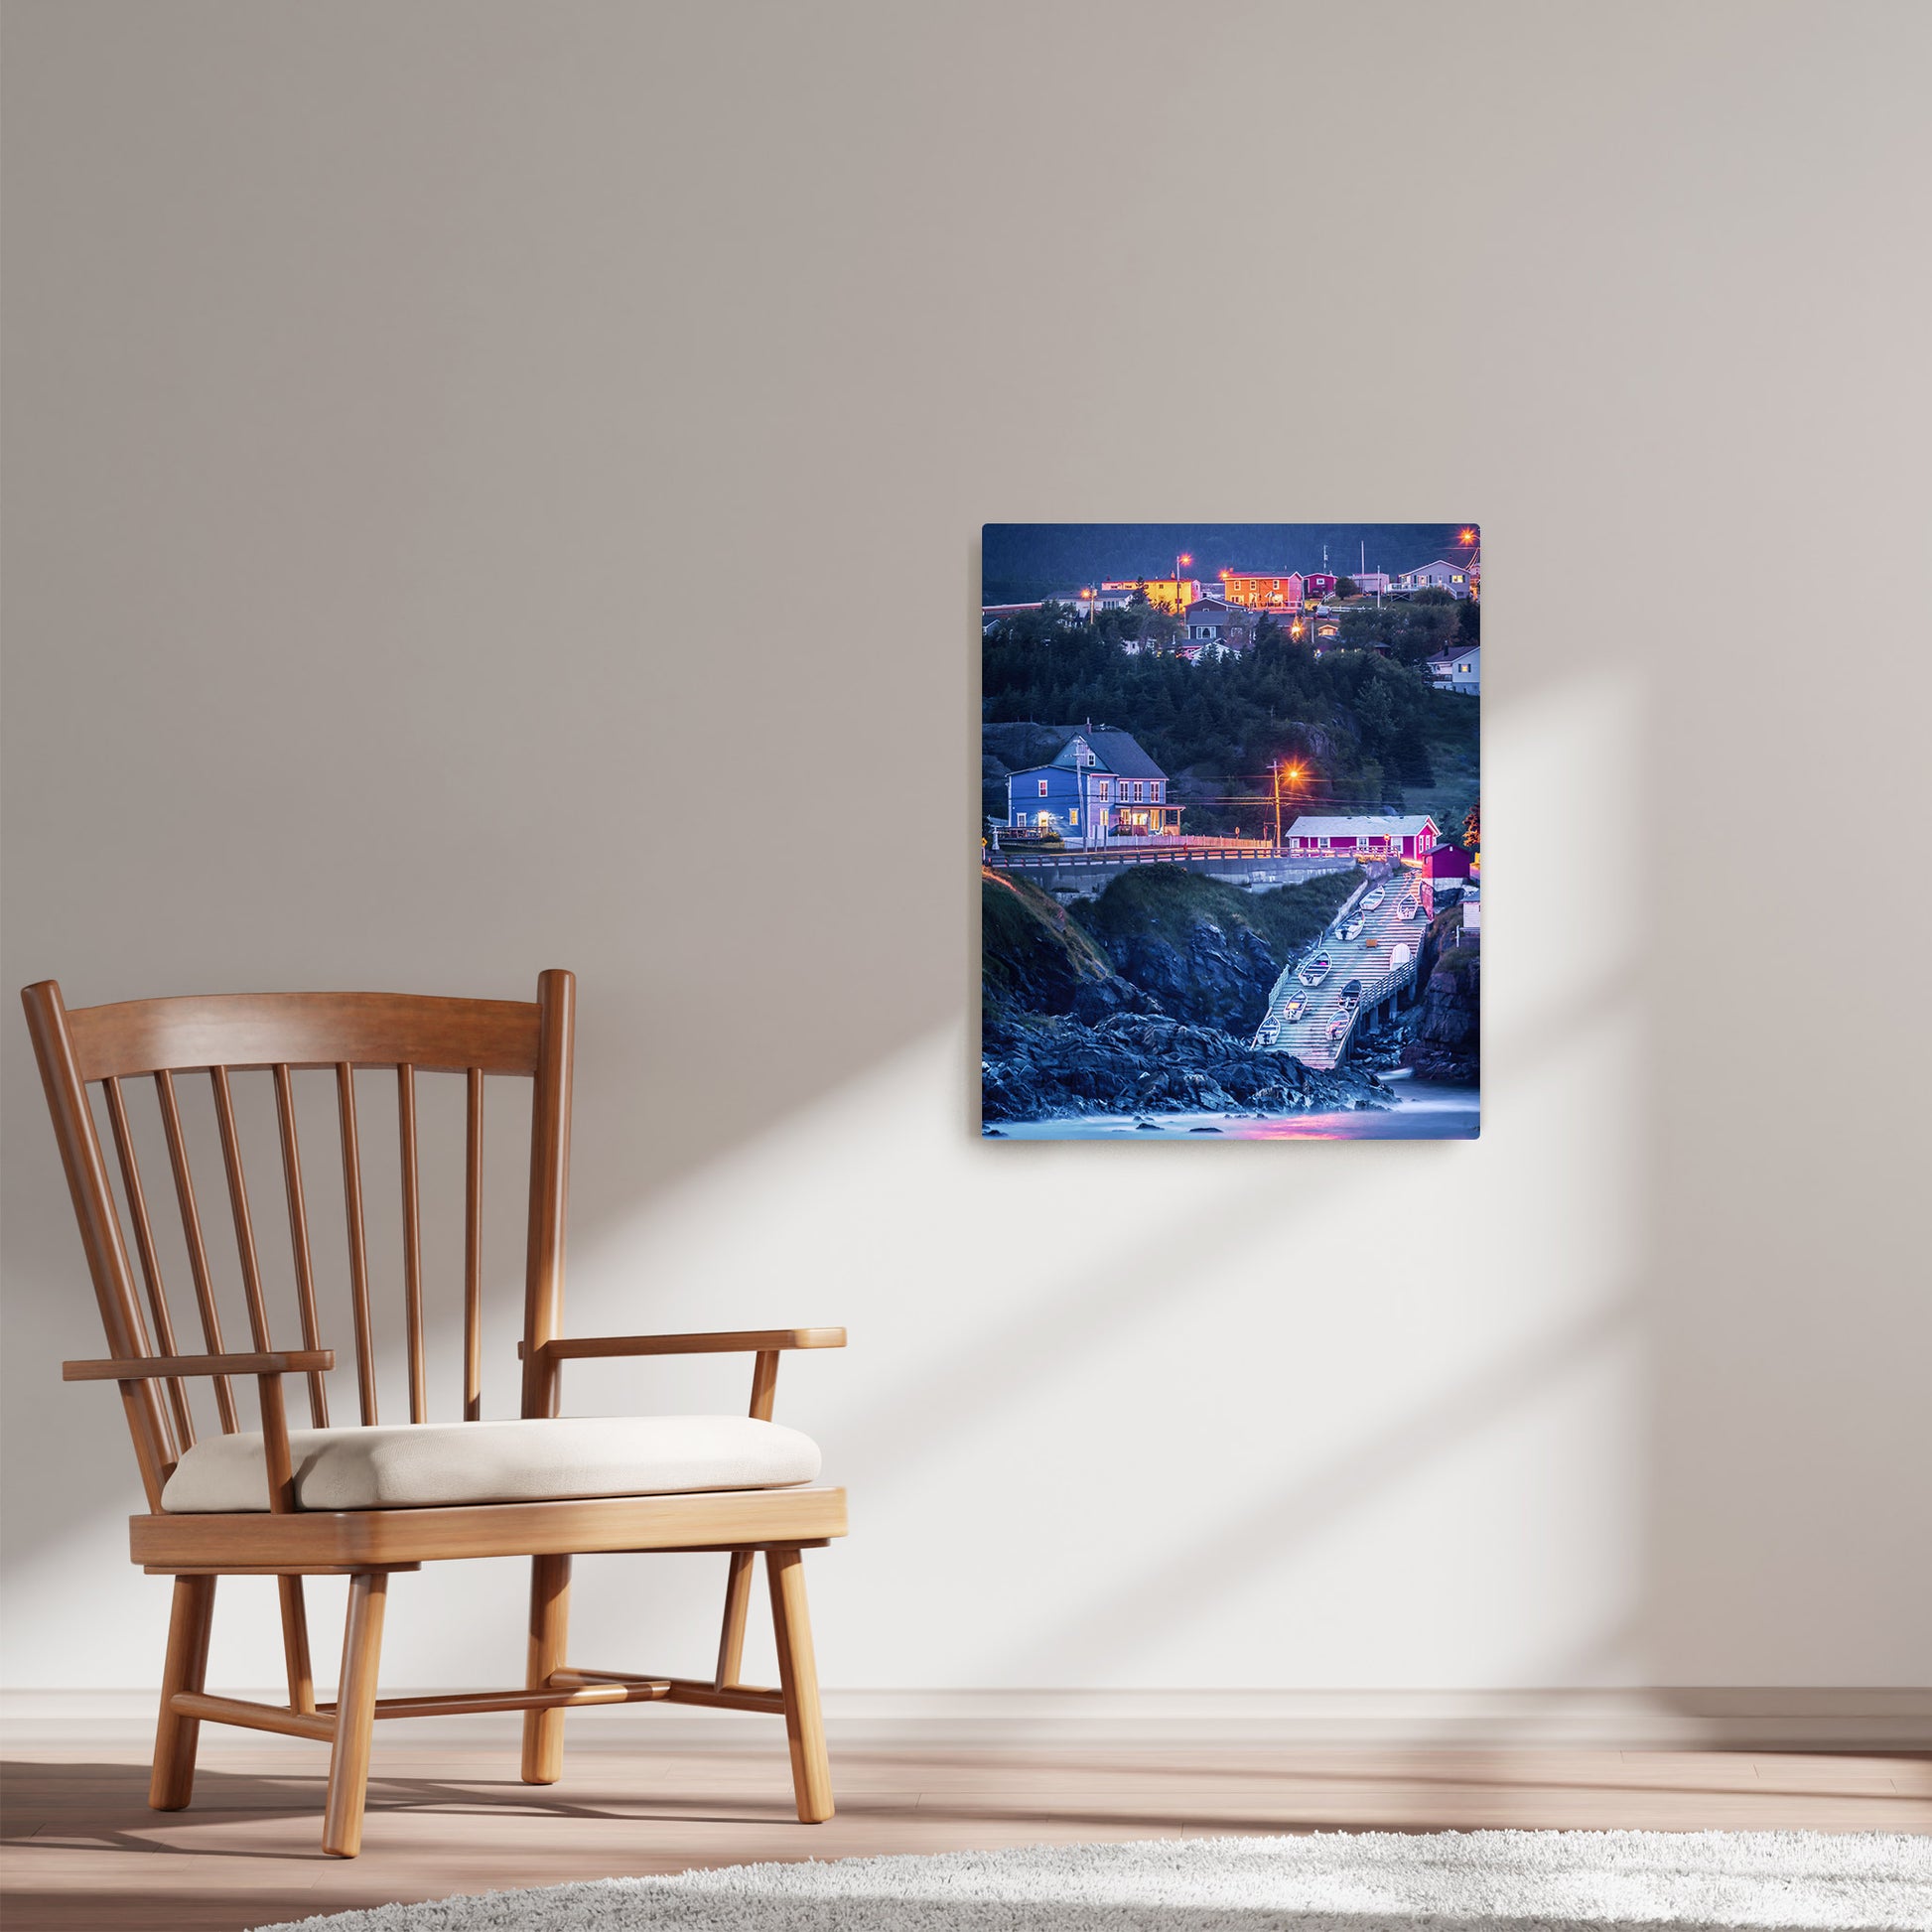 Ray Mackey's Pouch Cove Slip photography reproduced on HD metal print and displayed on wall